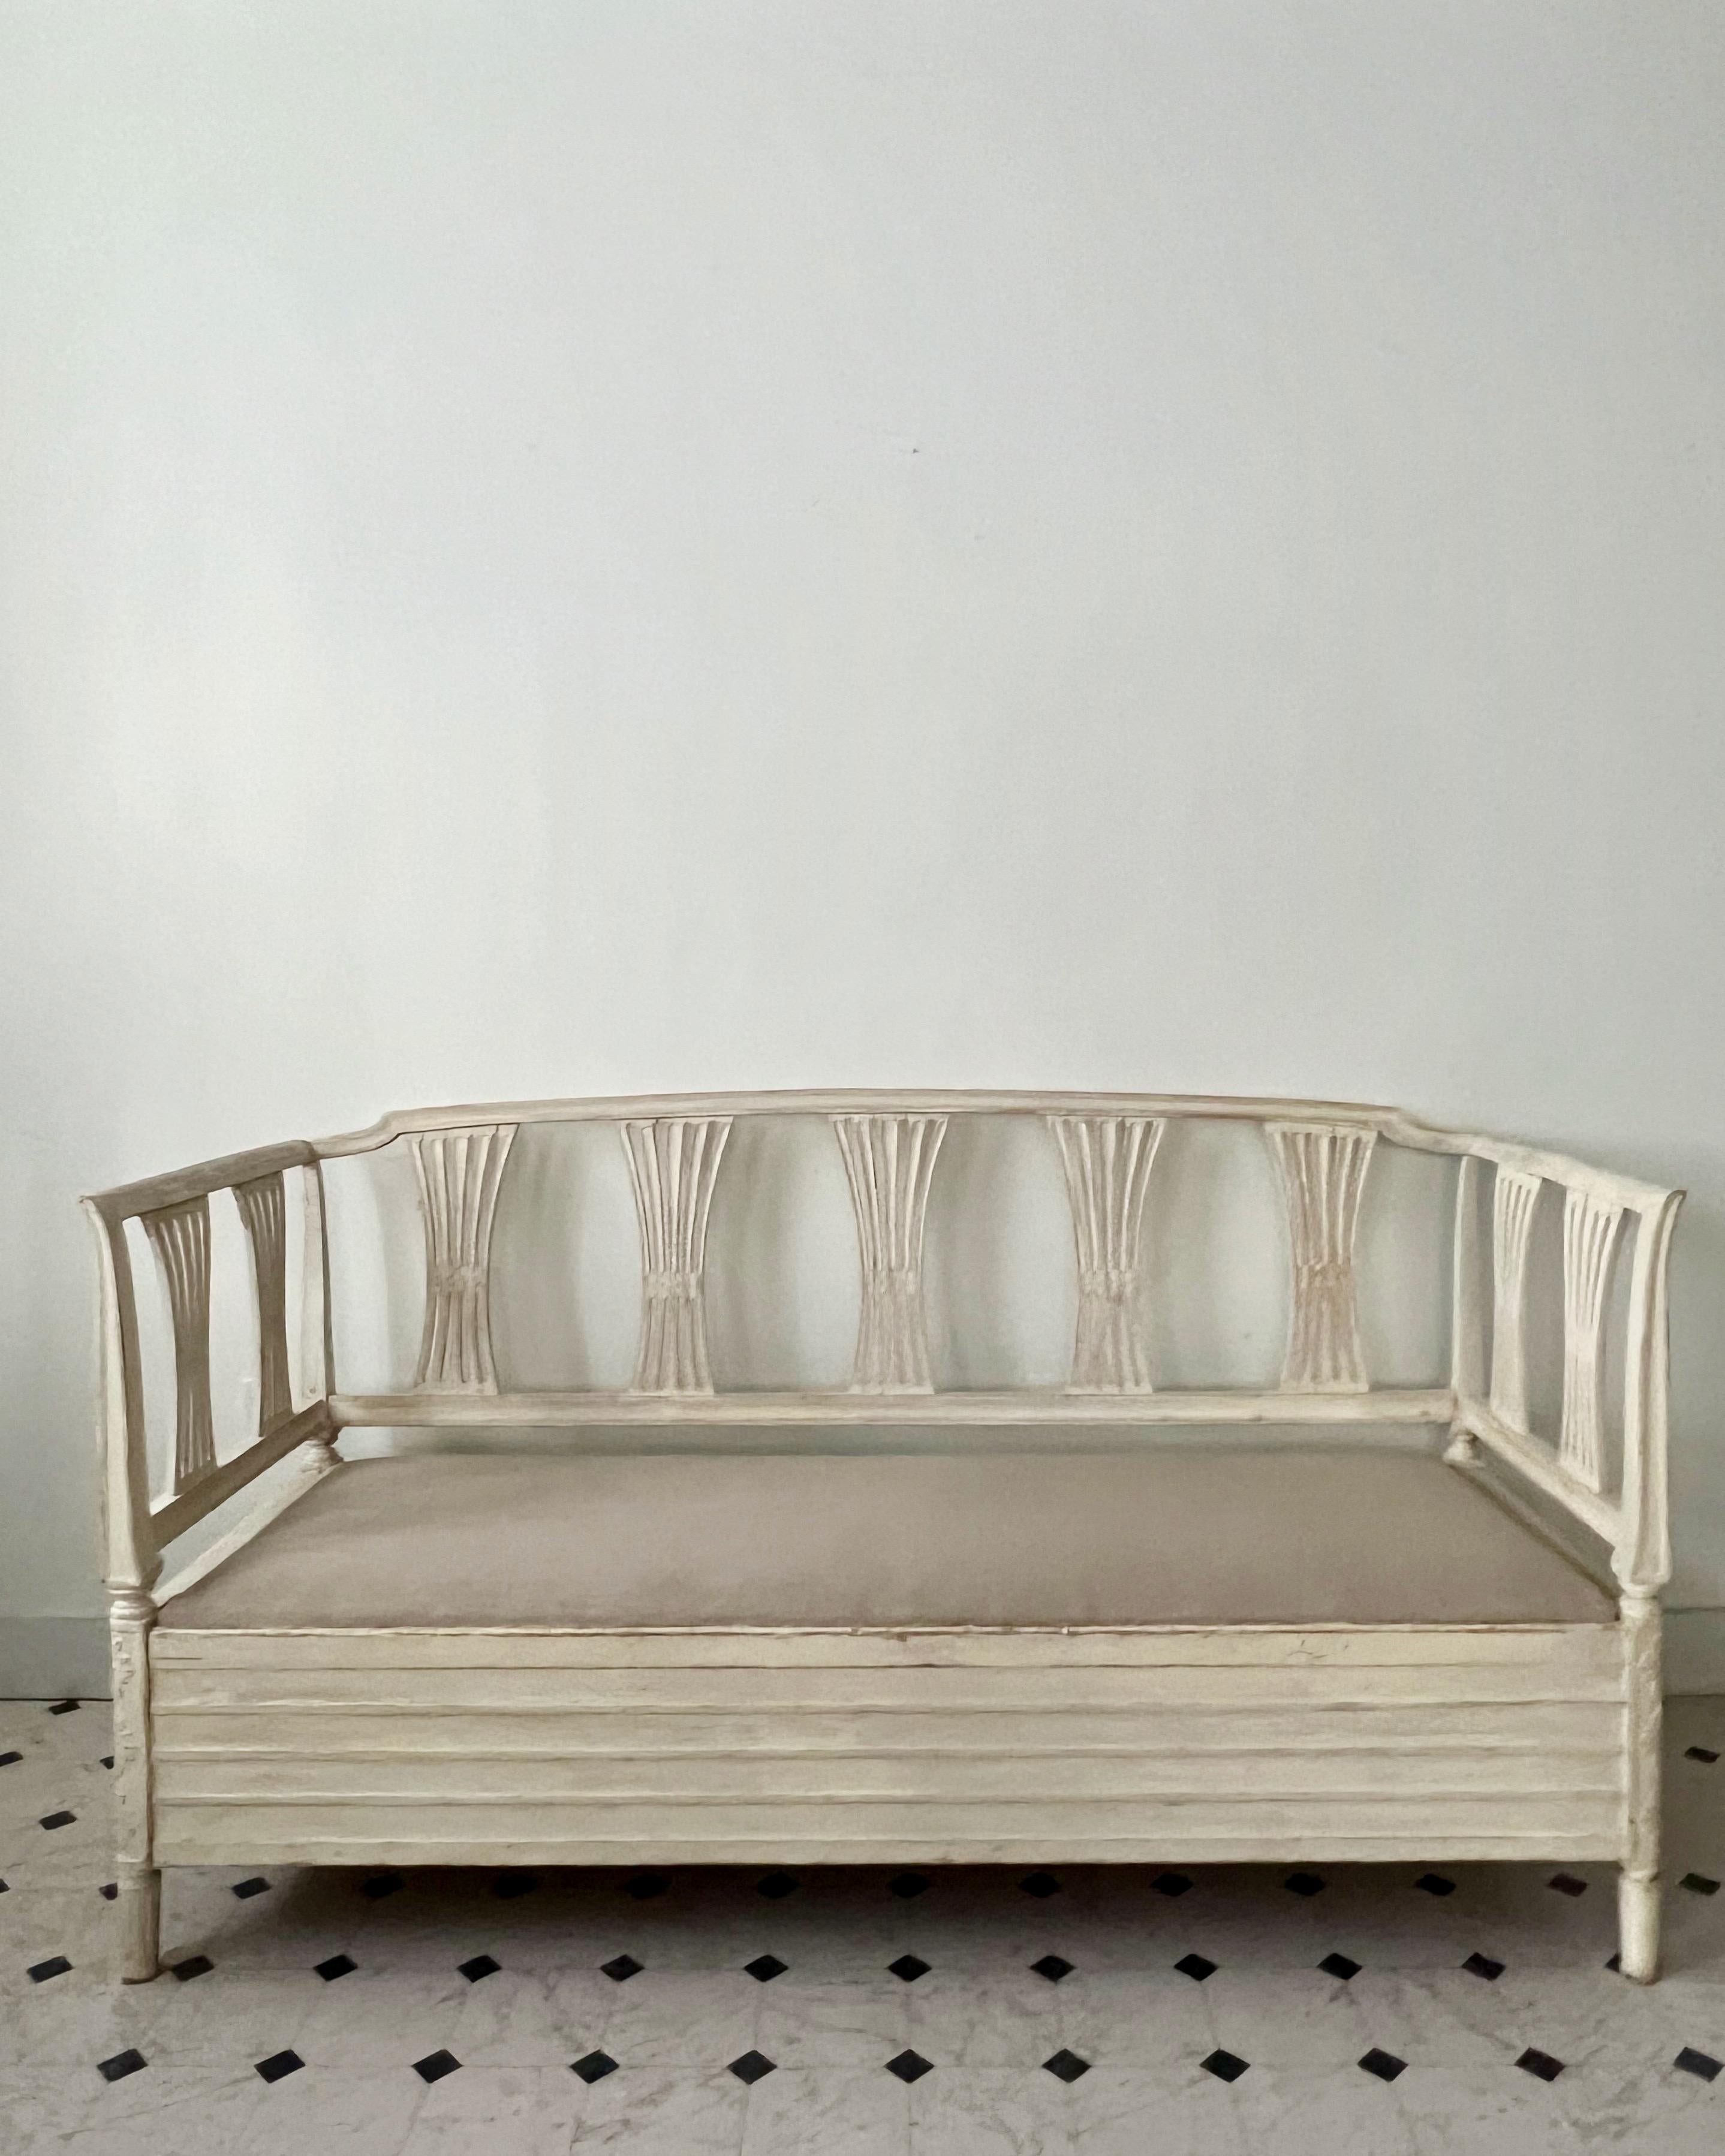 19th century Swedish Sofa Bench In Good Condition For Sale In Charleston, SC